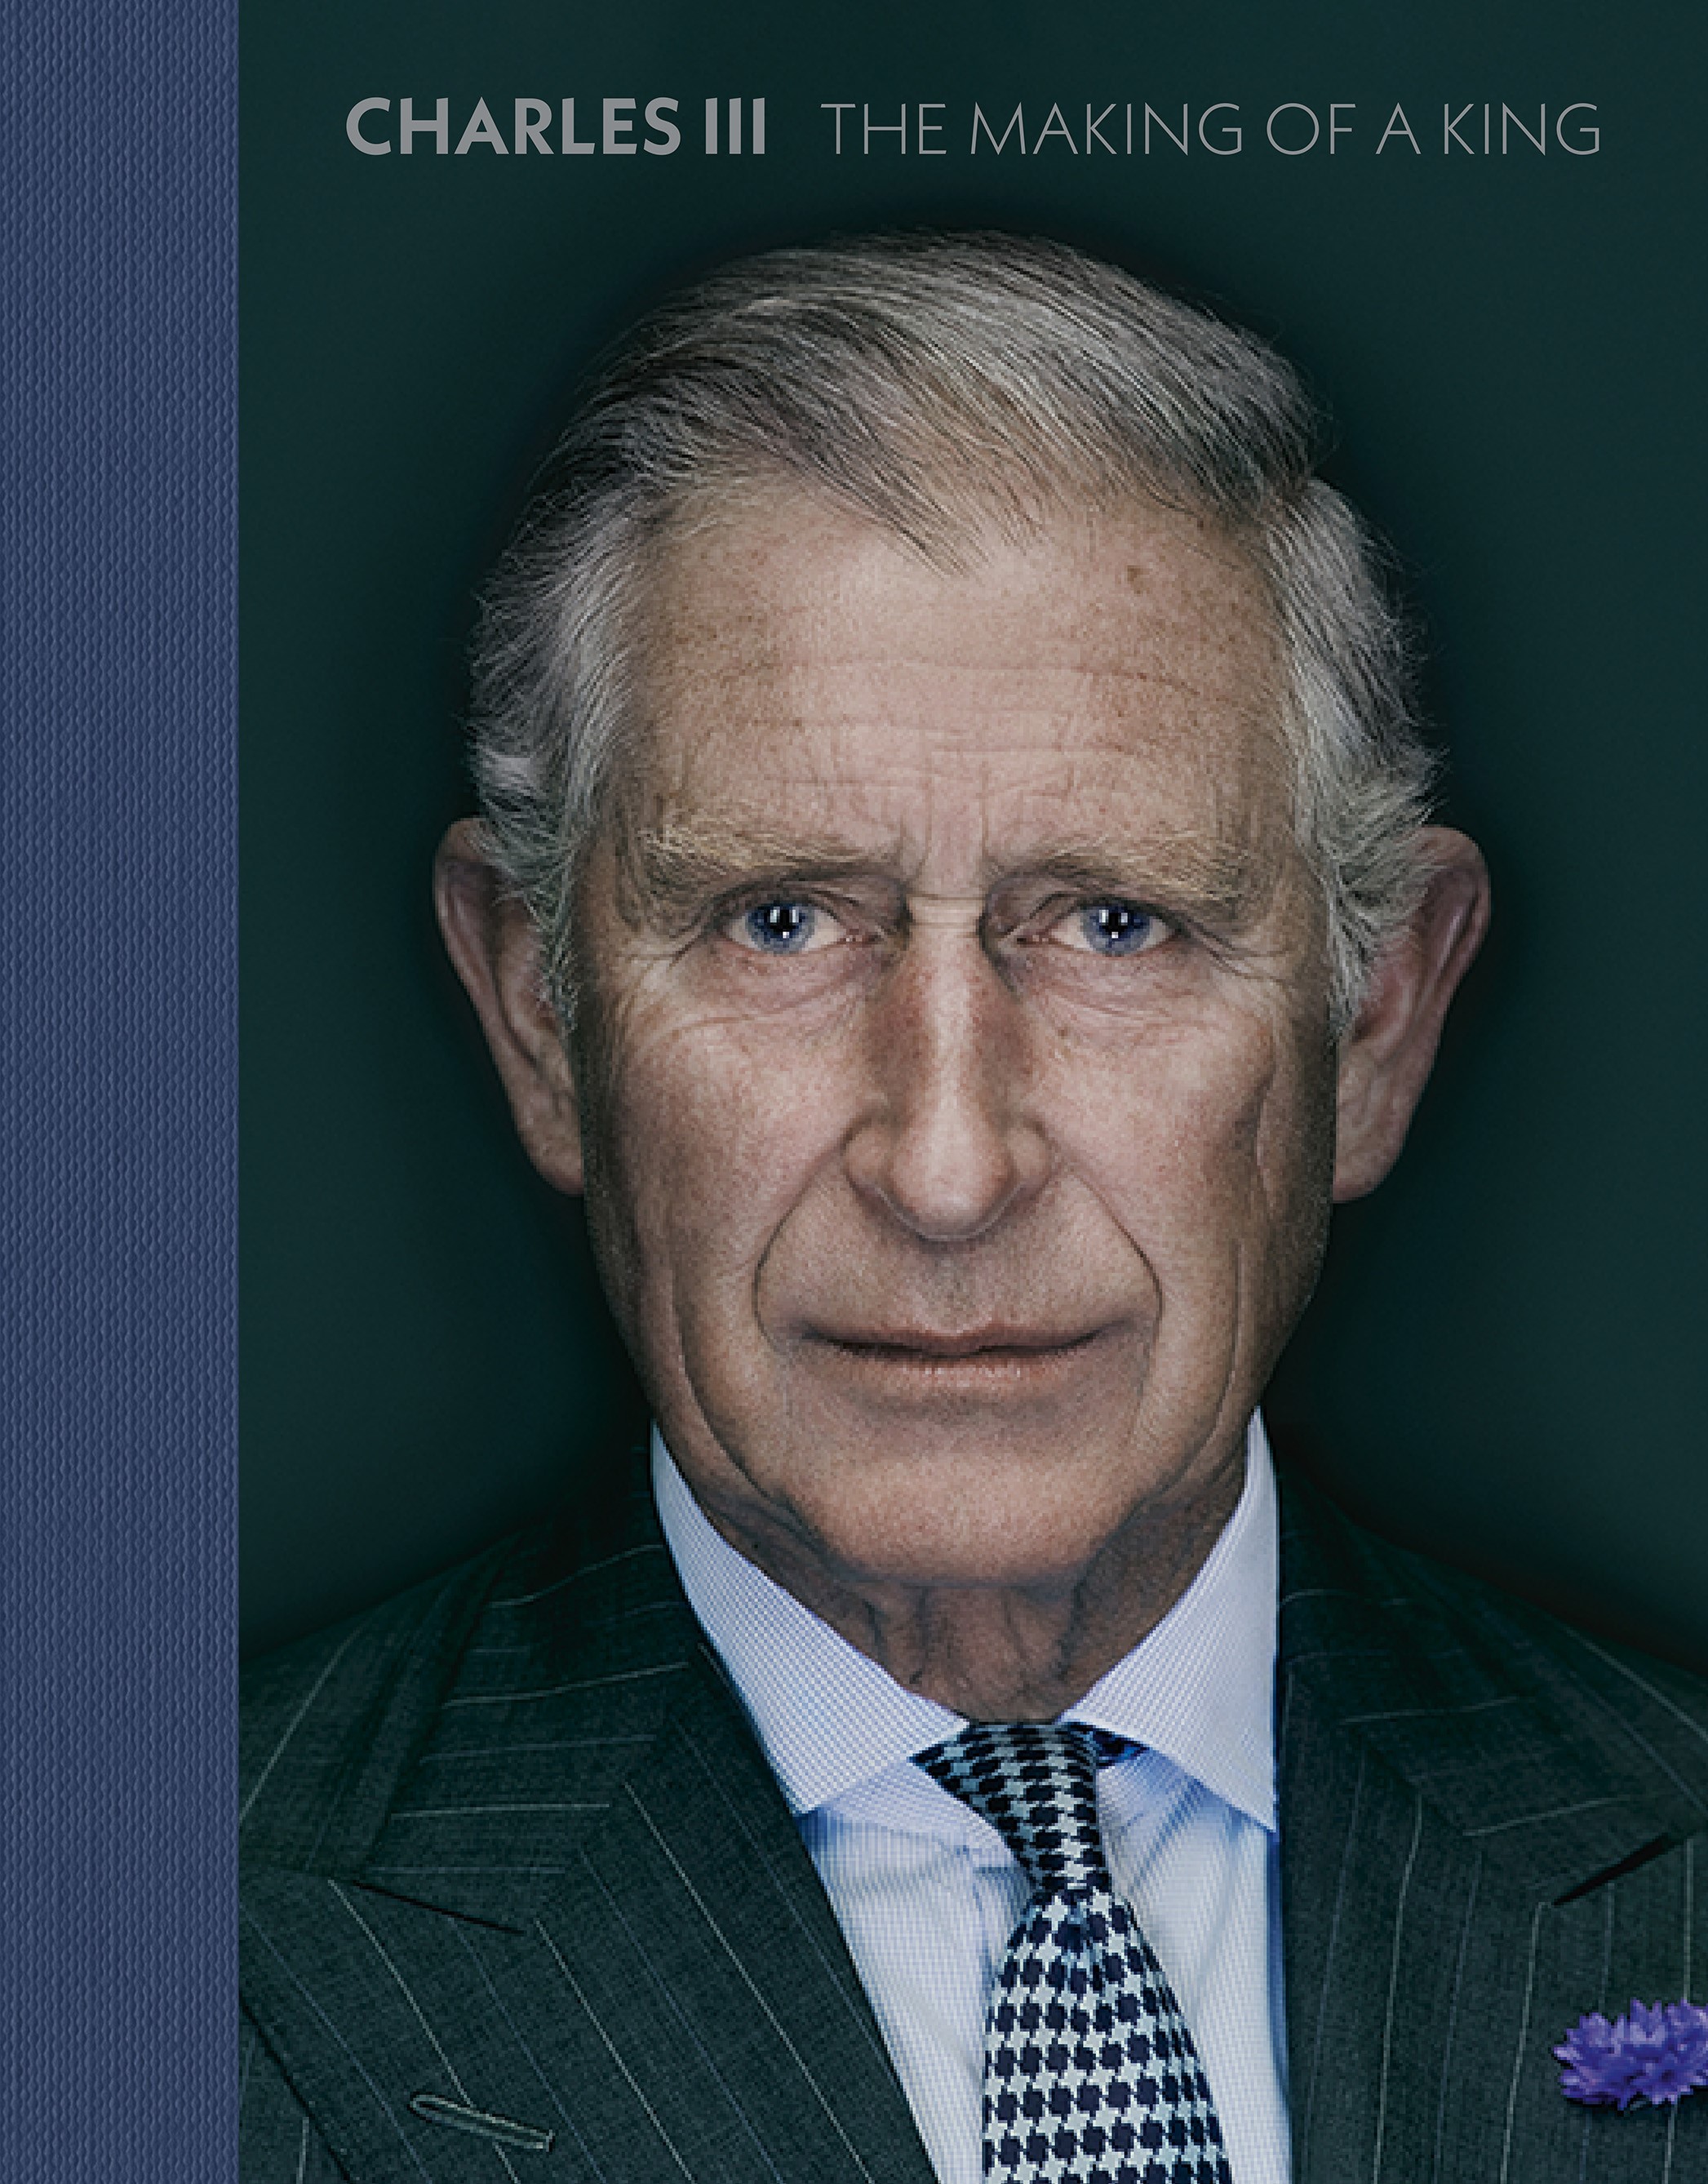 The Bookseller Rights National Portrait Gallery marks the King's